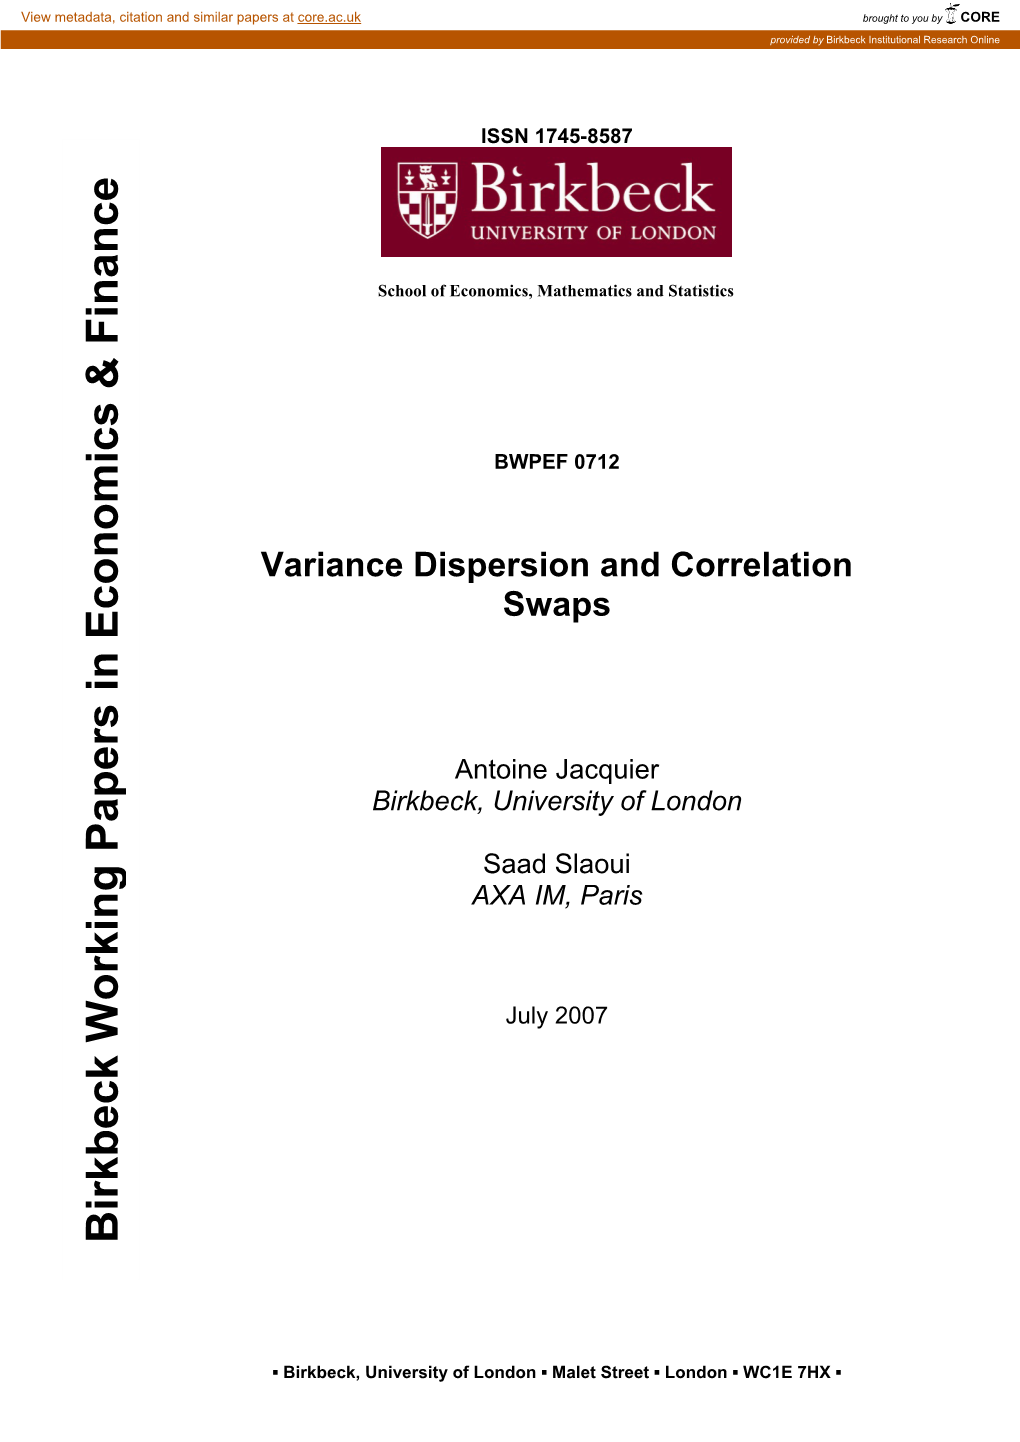 Variance Dispersion and Correlation Swaps